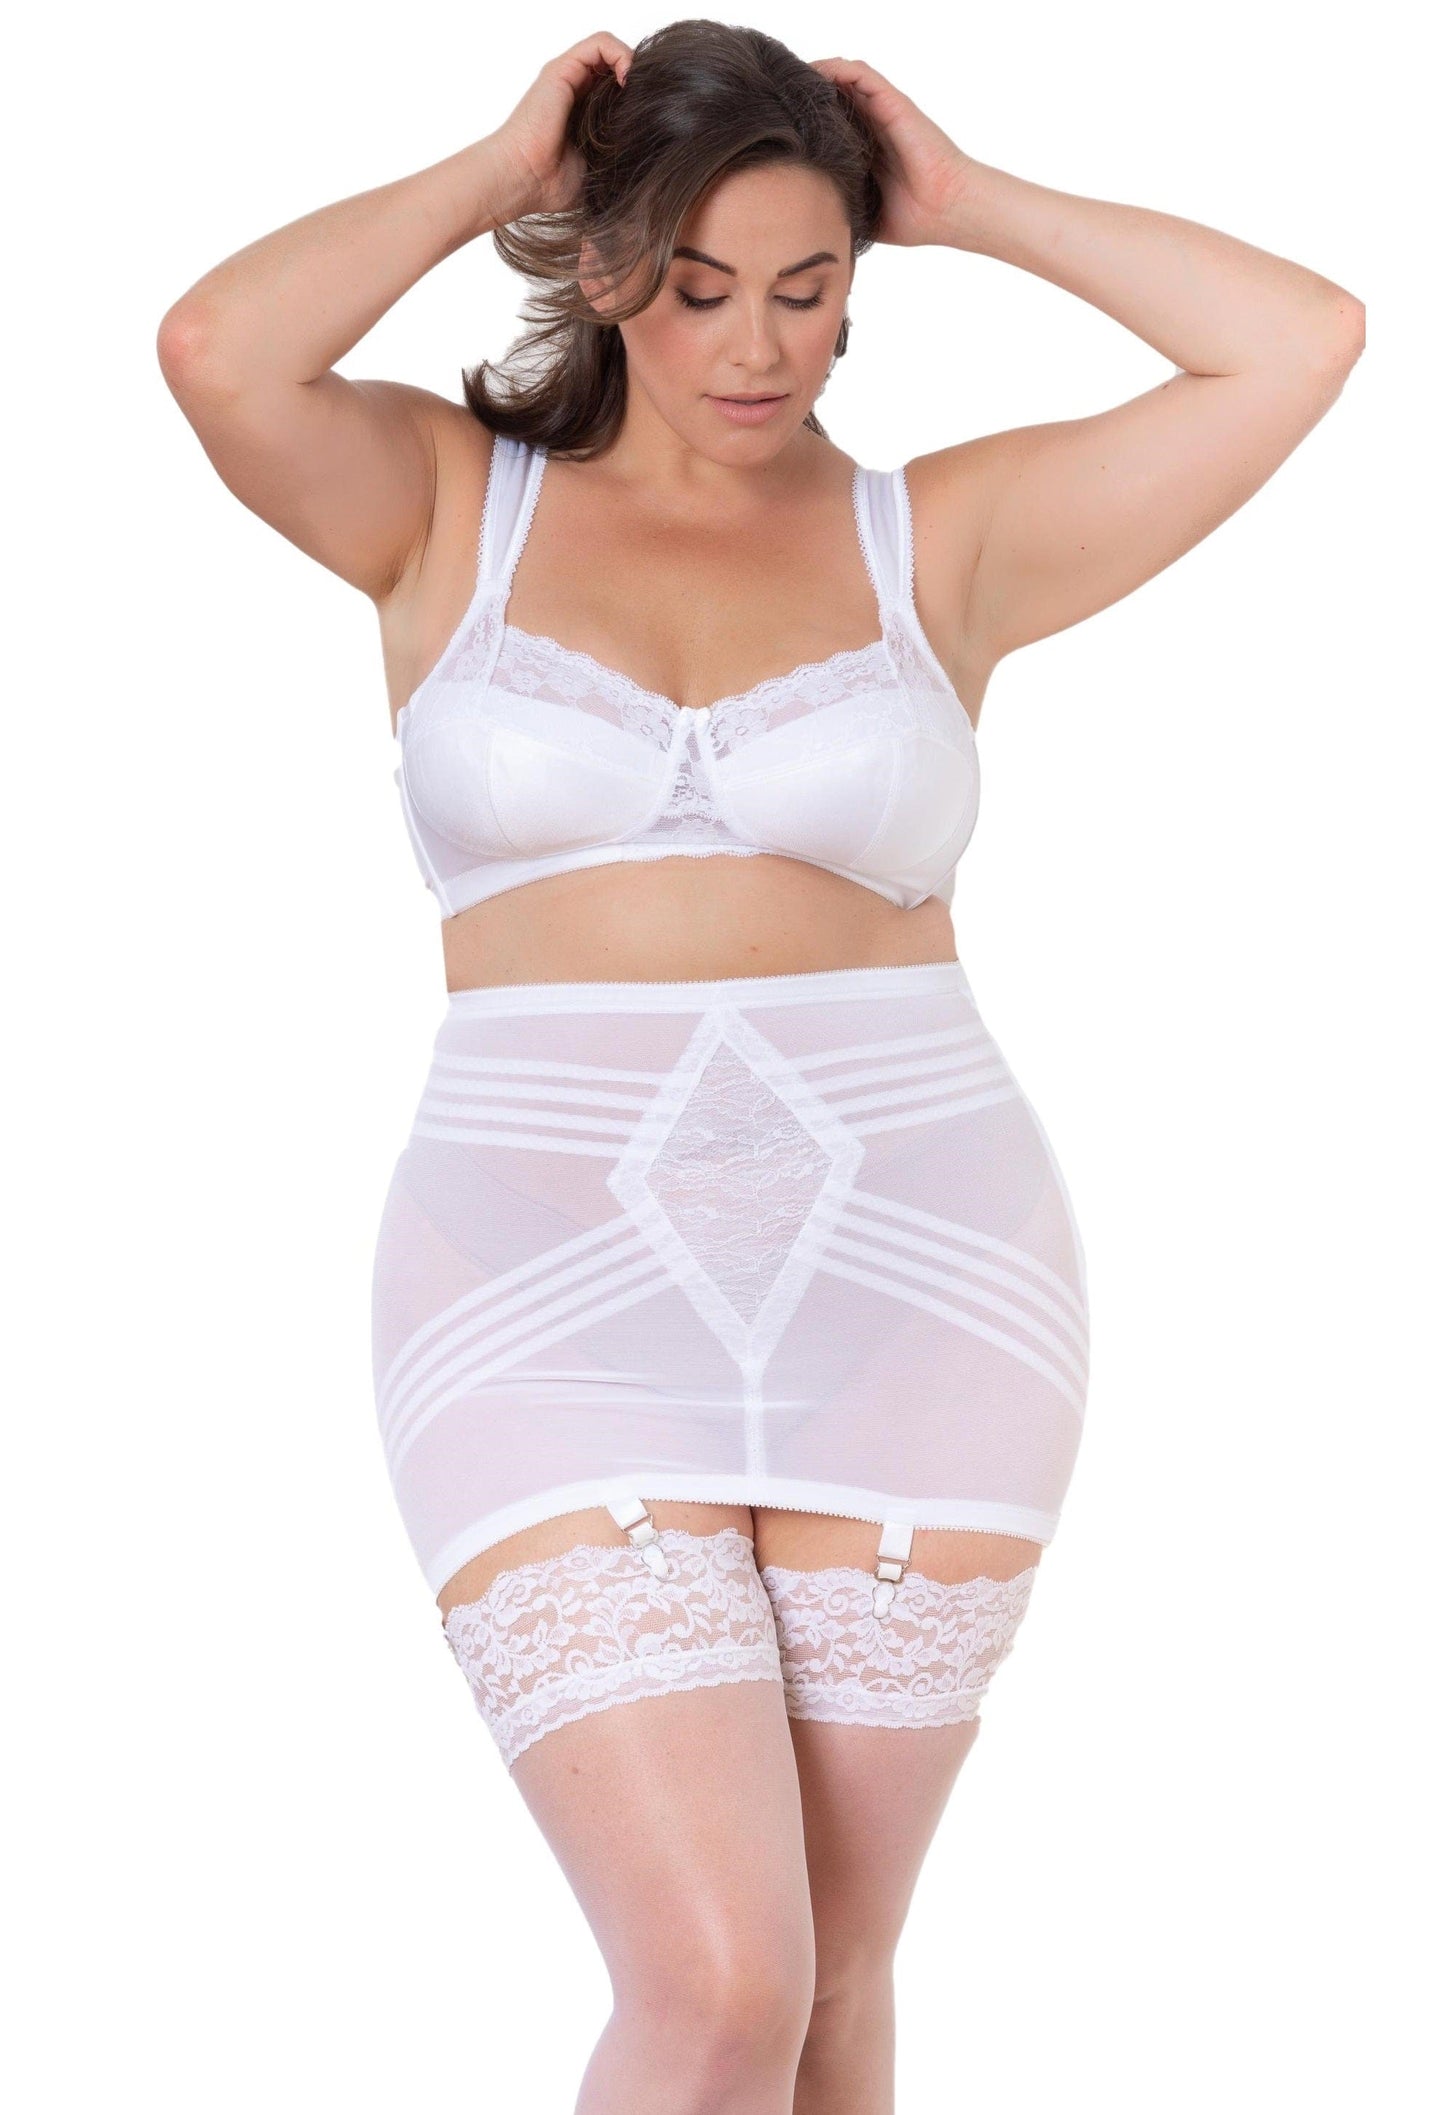 Retro Style Roll-On Girdle in Red or White